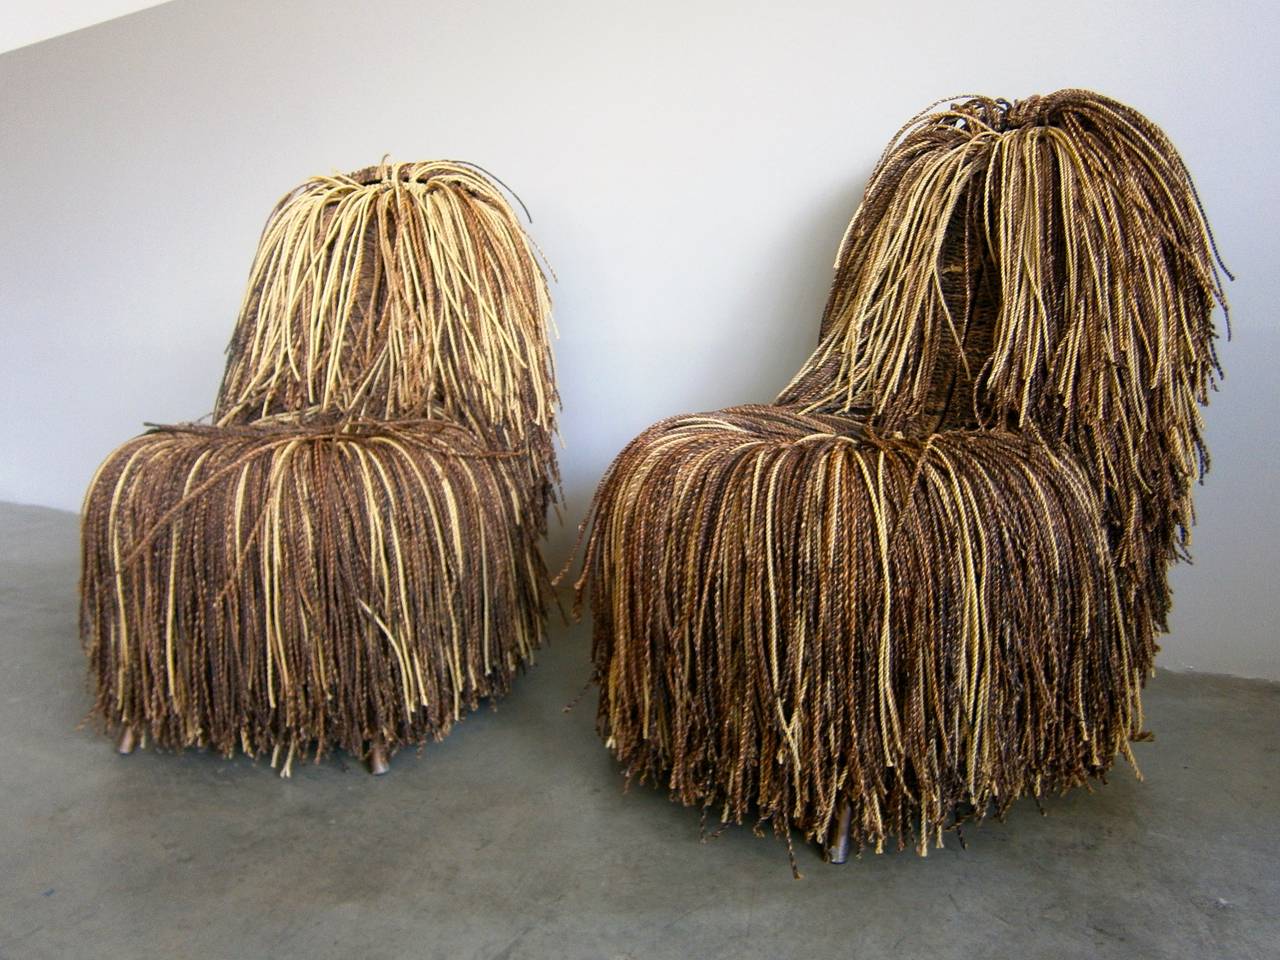 Modern Jocular Pair of Shaggy Cord Chairs in the Style of the Campana Brothers.